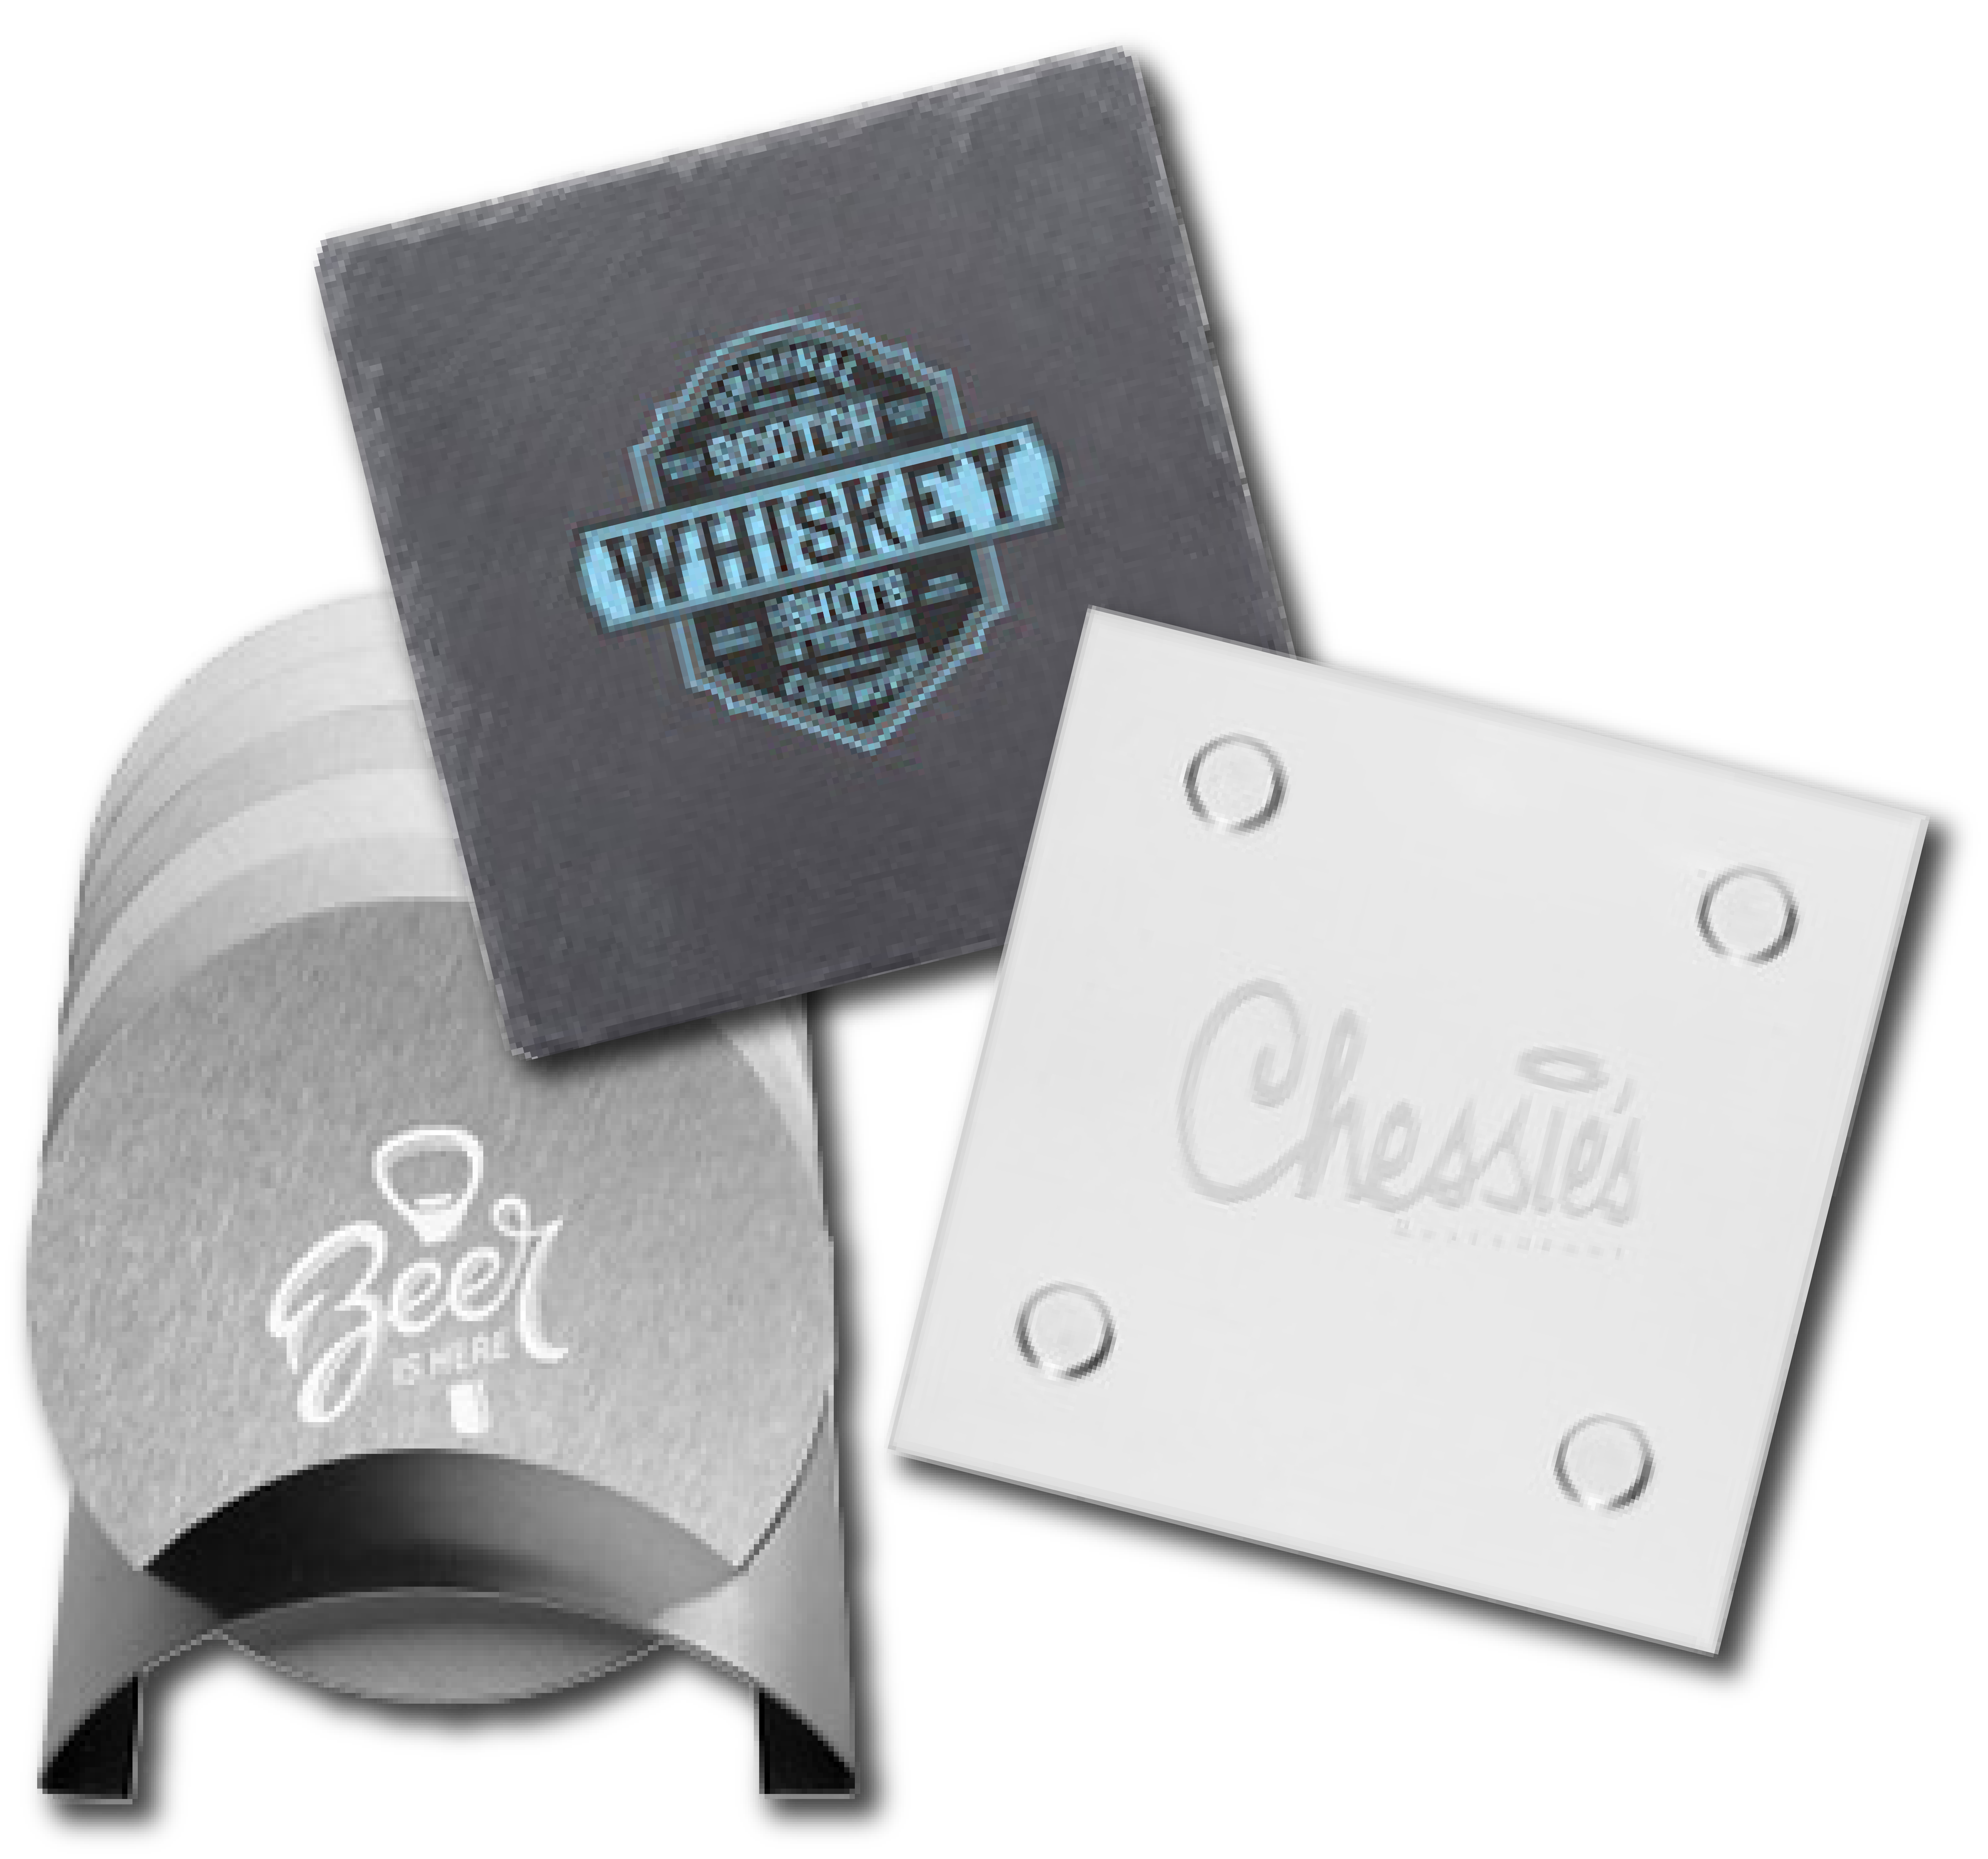 Custom Printed and Engraved Coasters to Brand Your Business or Cherish a Memory